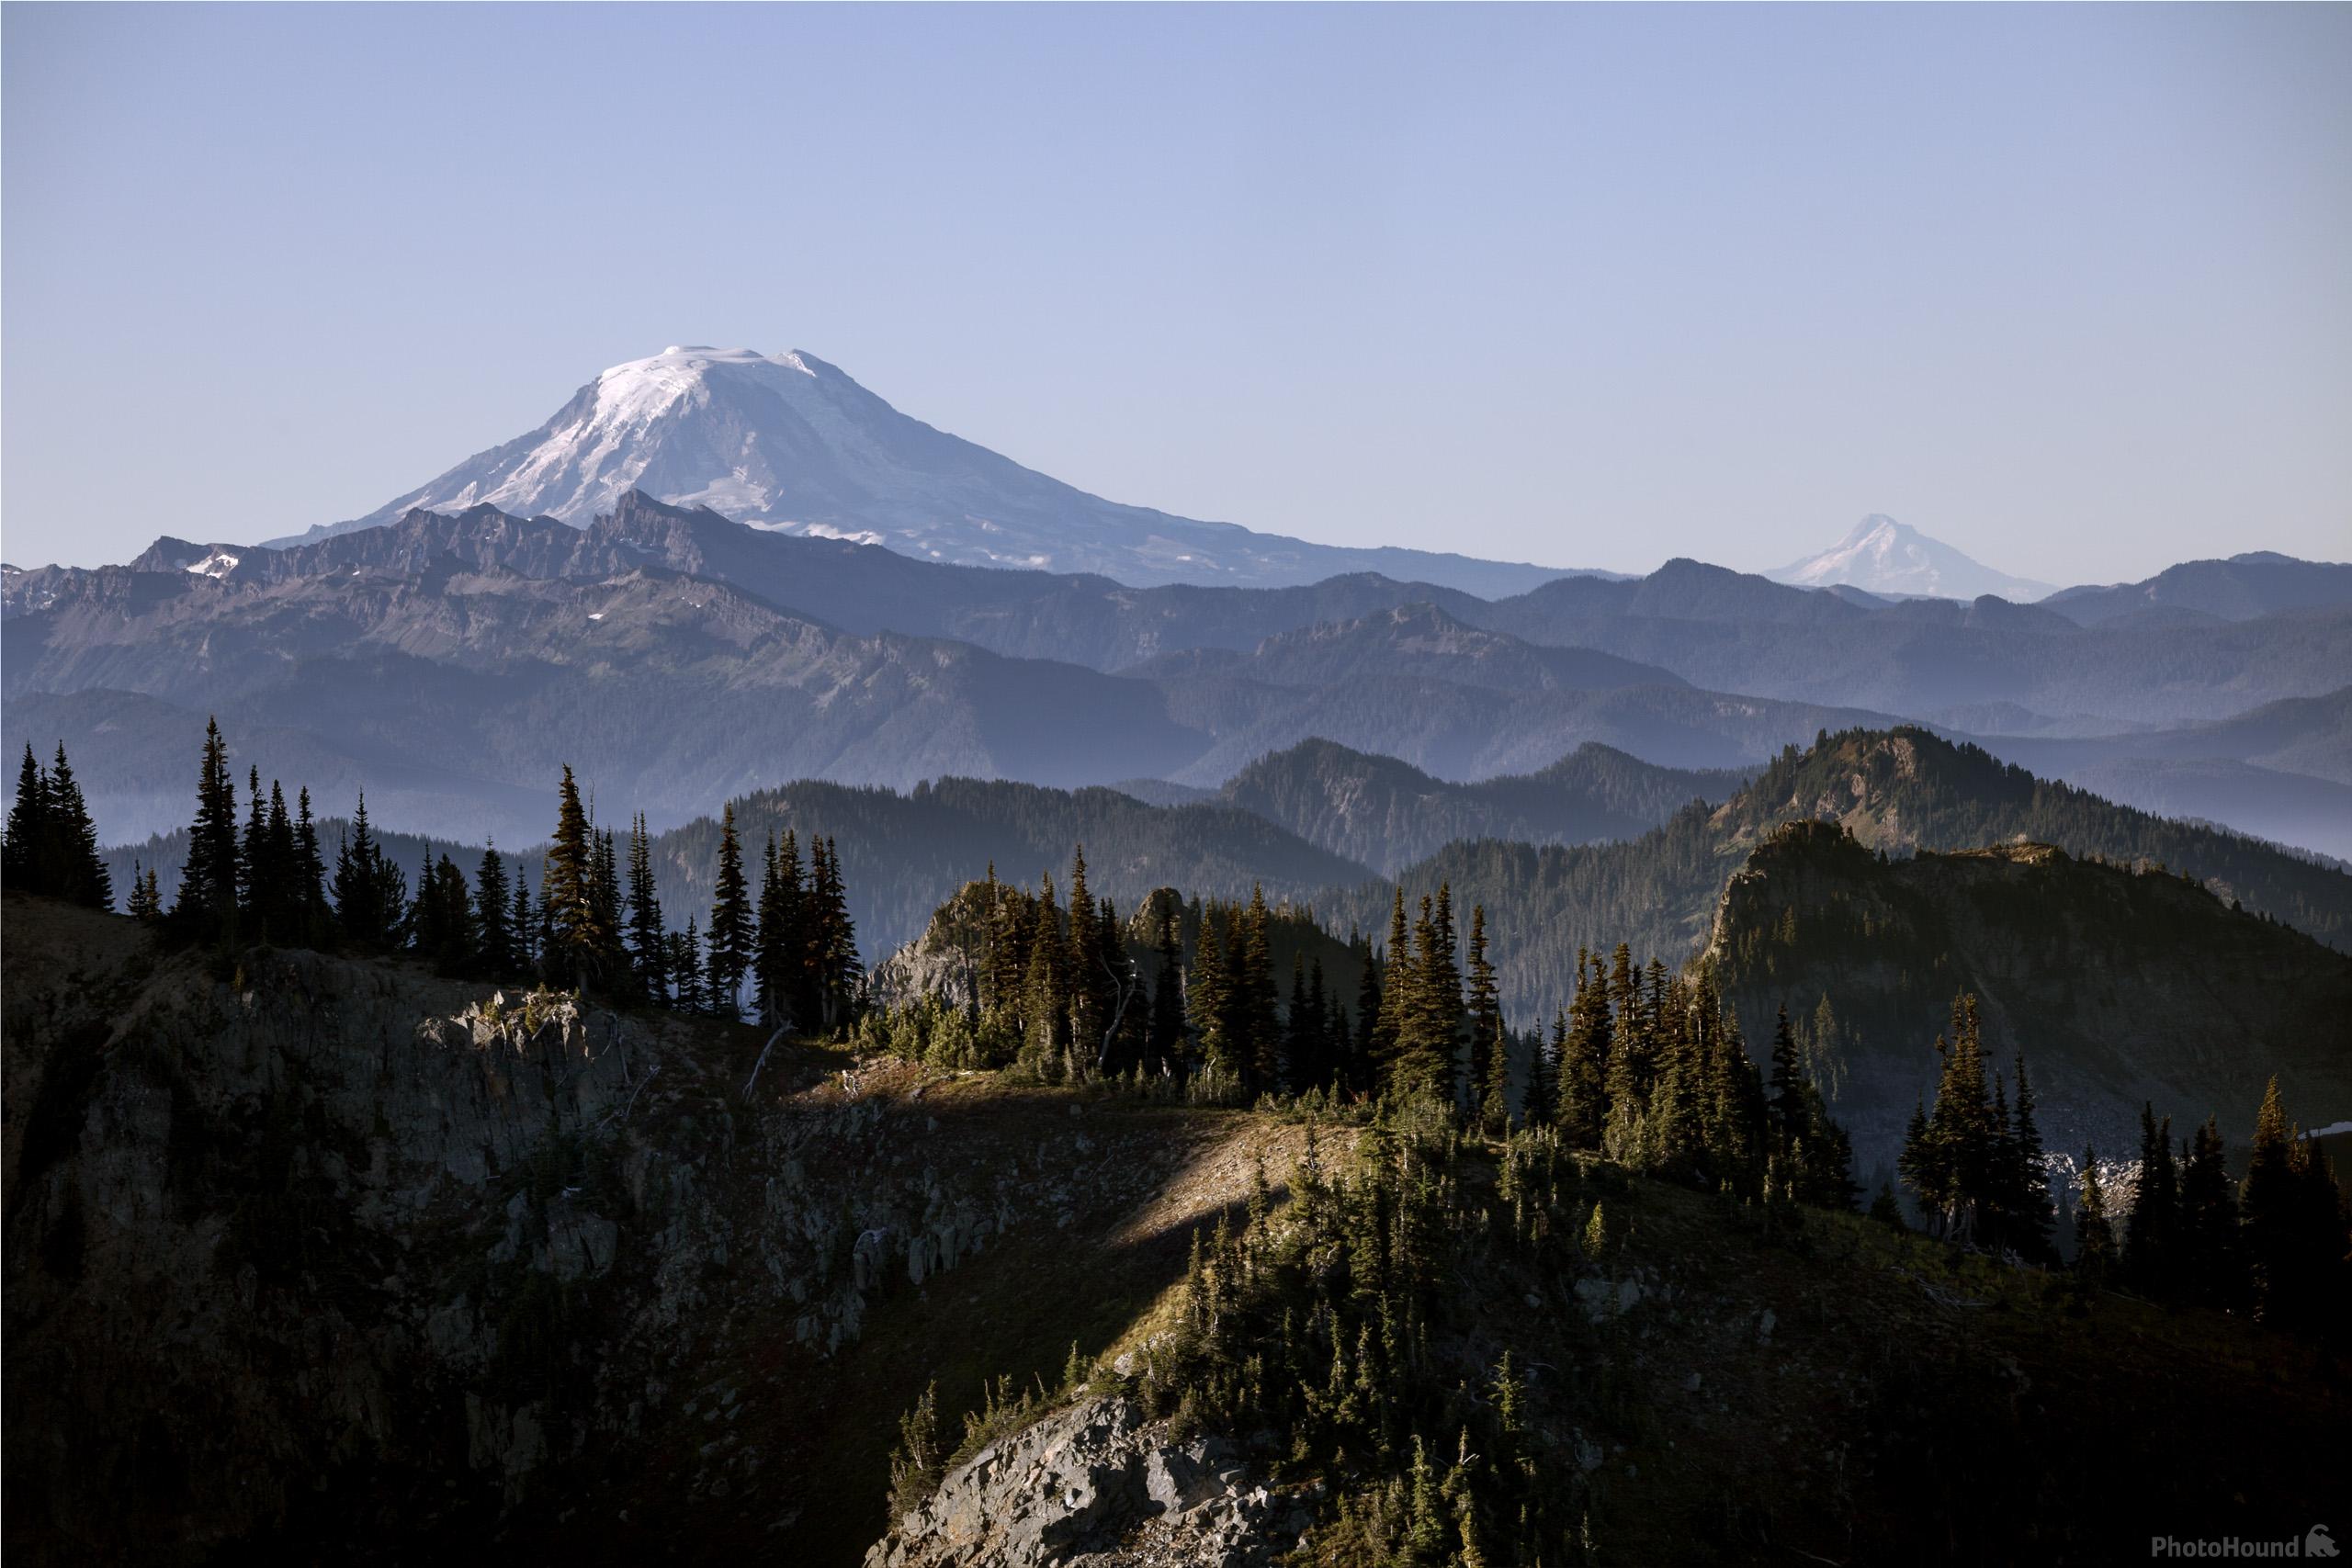 Image of Crystal Peak, Mount Rainier National Park by T. Kirkendall and V. Spring